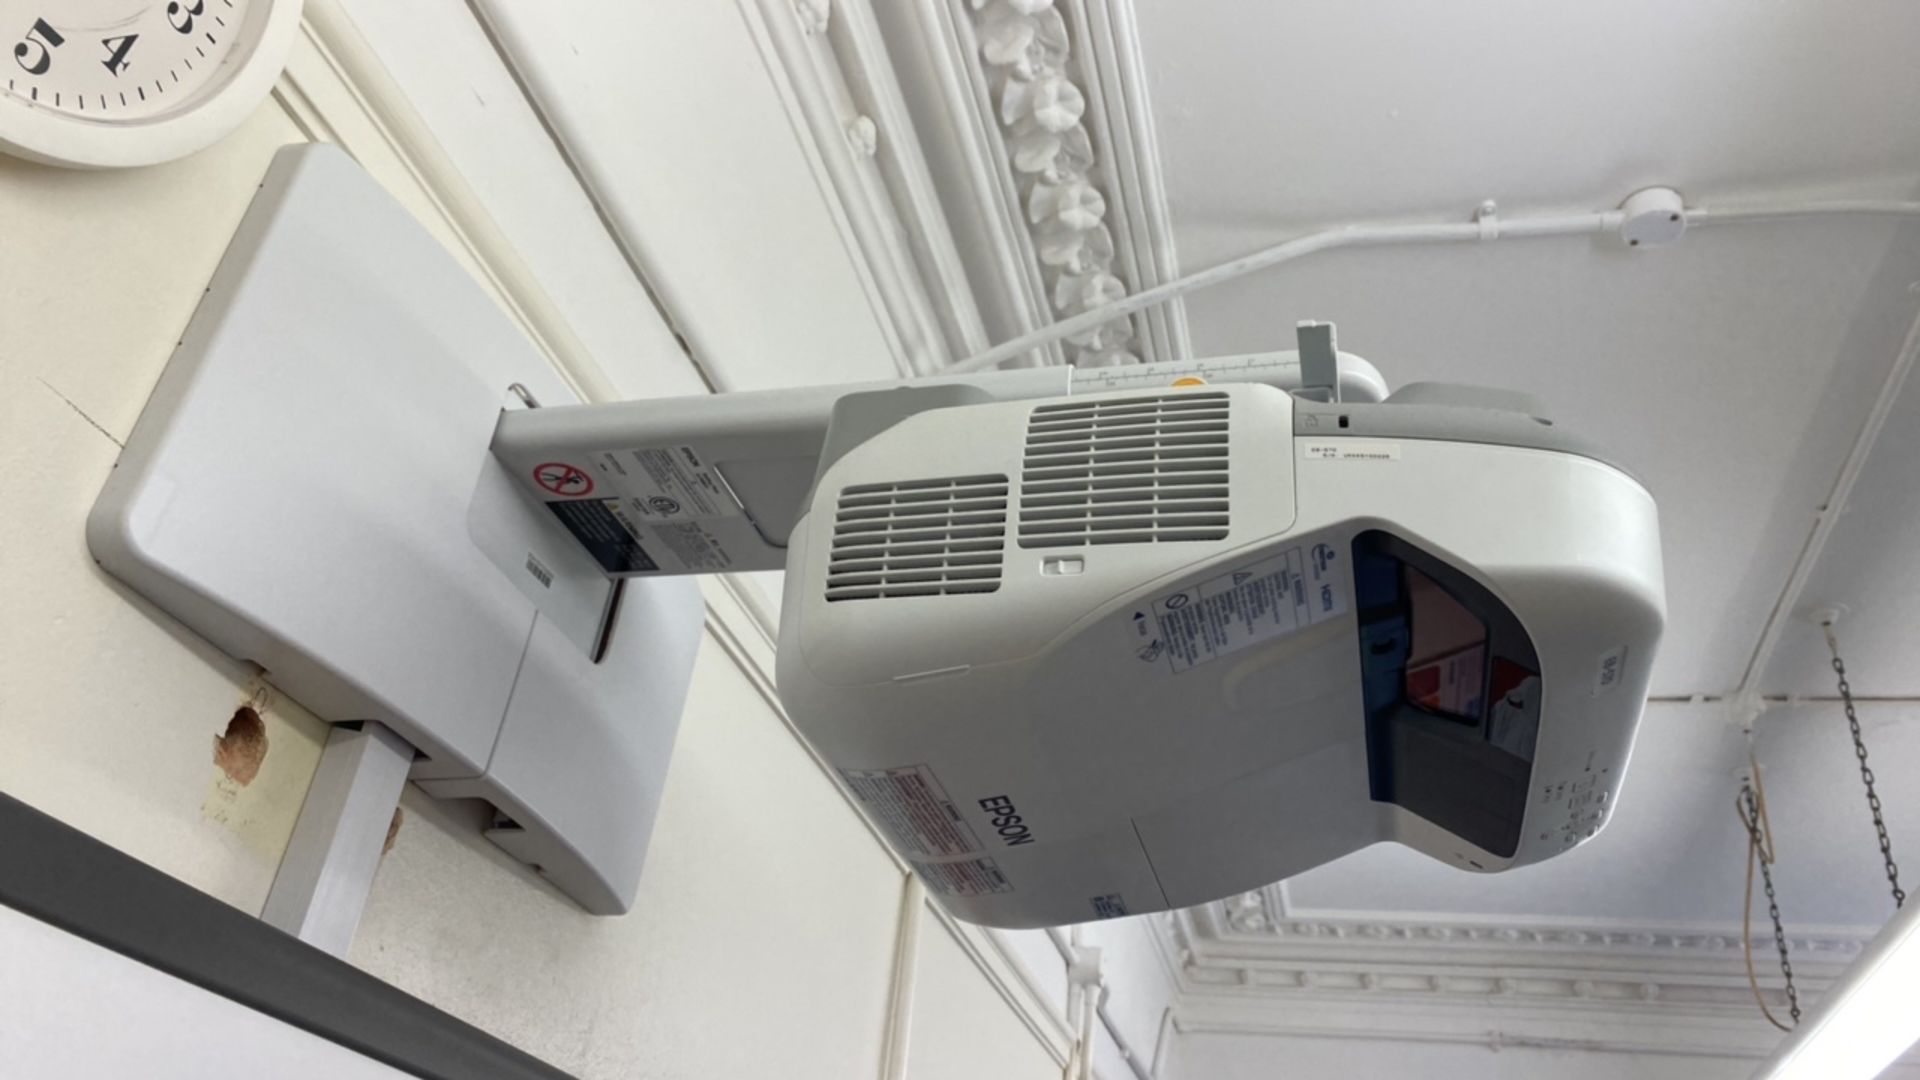 Epson EB-570 Projector - Image 2 of 5